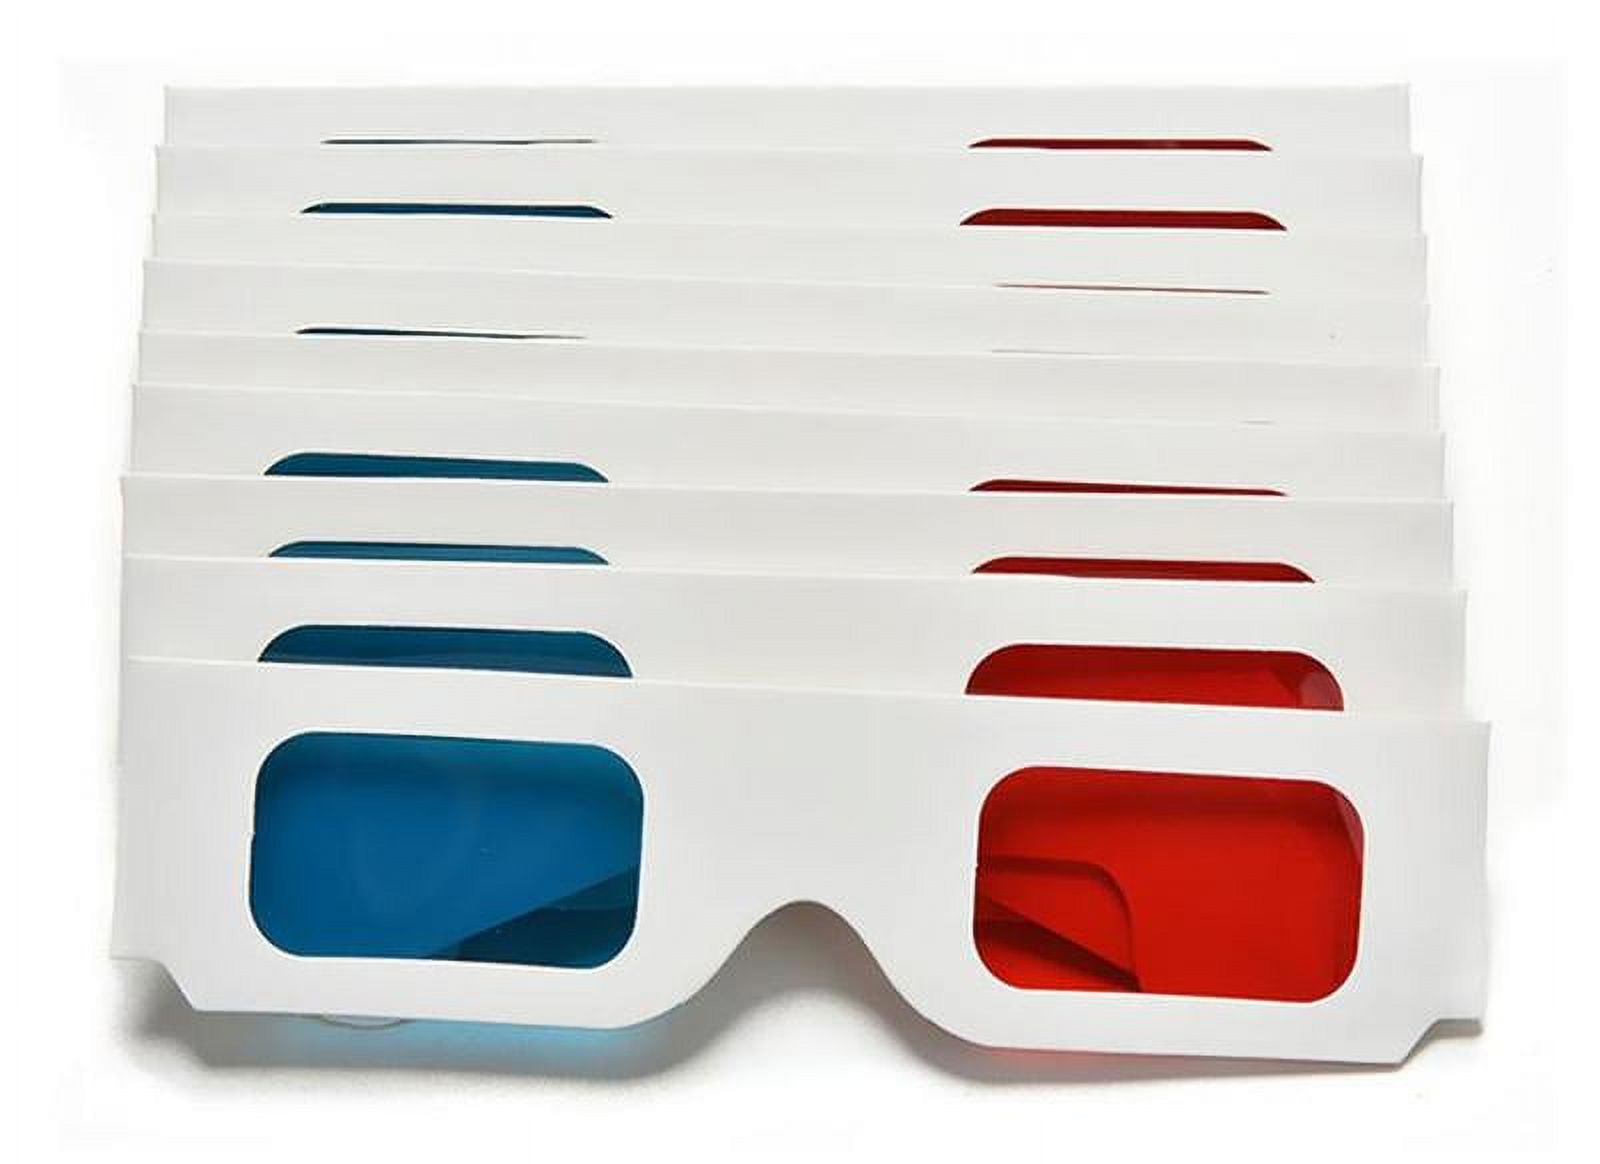 Universal Anaglyph Cardboard Paper Red Blue Cyan 3d Glasses Movie Glasses NEW - image 1 of 7